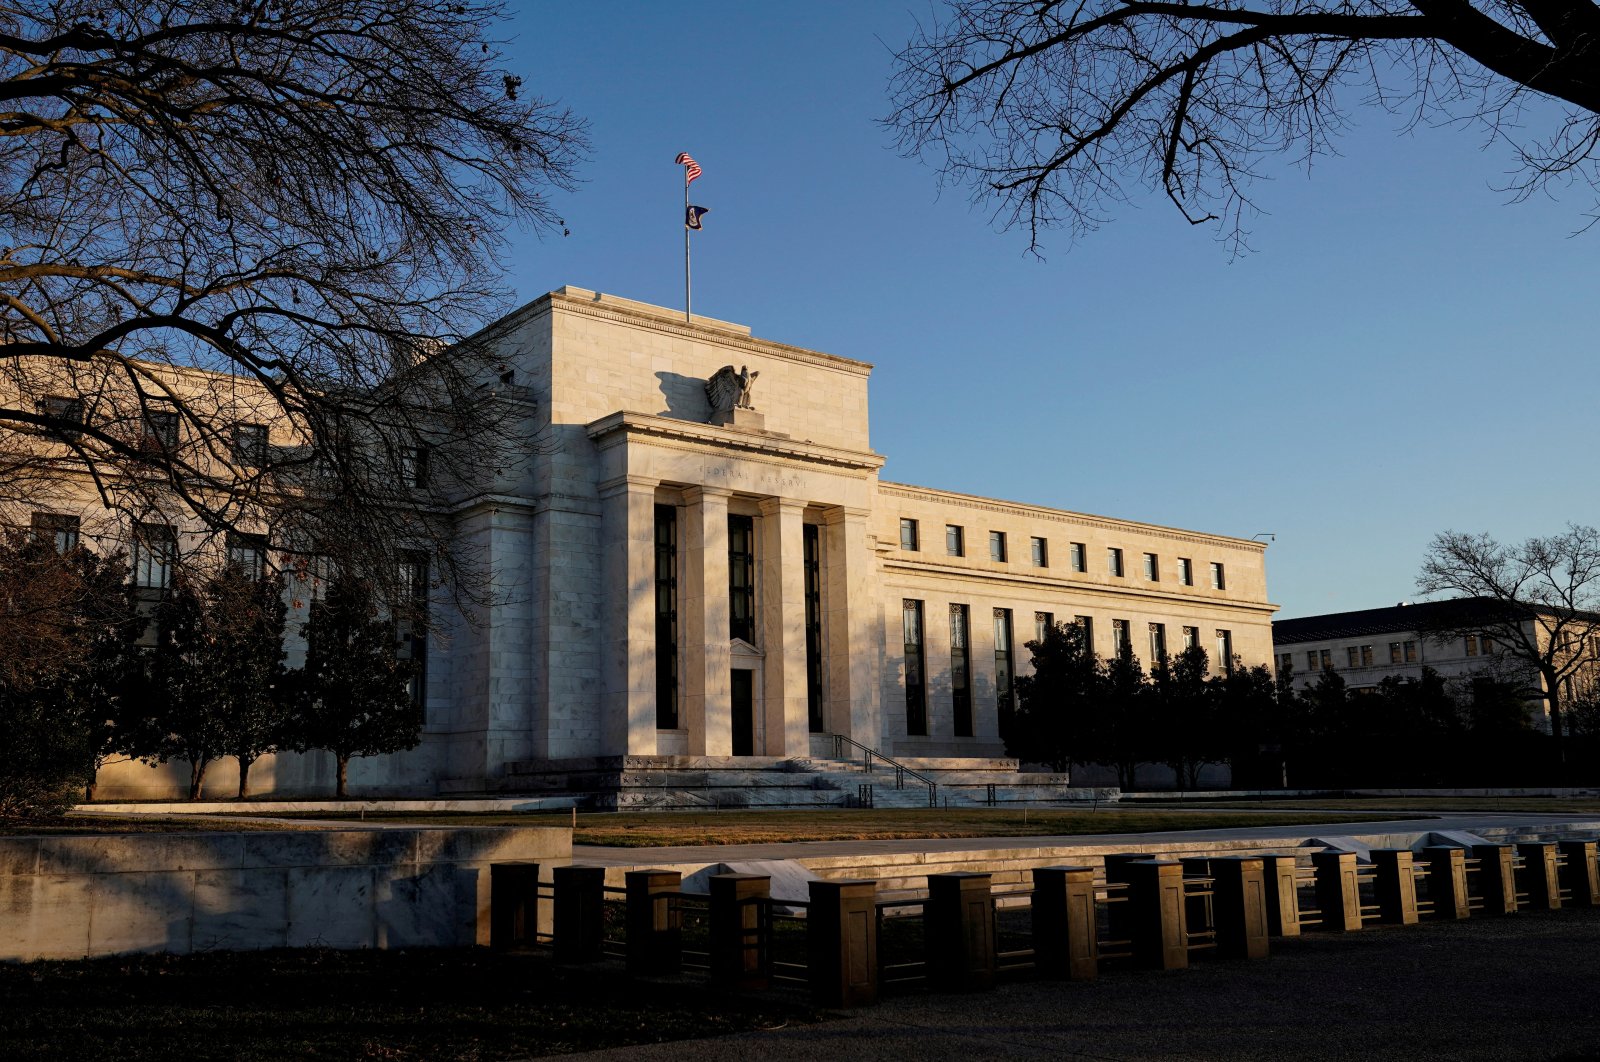 The Federal Reserve building is seen in Washington, D.C., U.S., Jan. 26, 2022. (Reuters Photo)